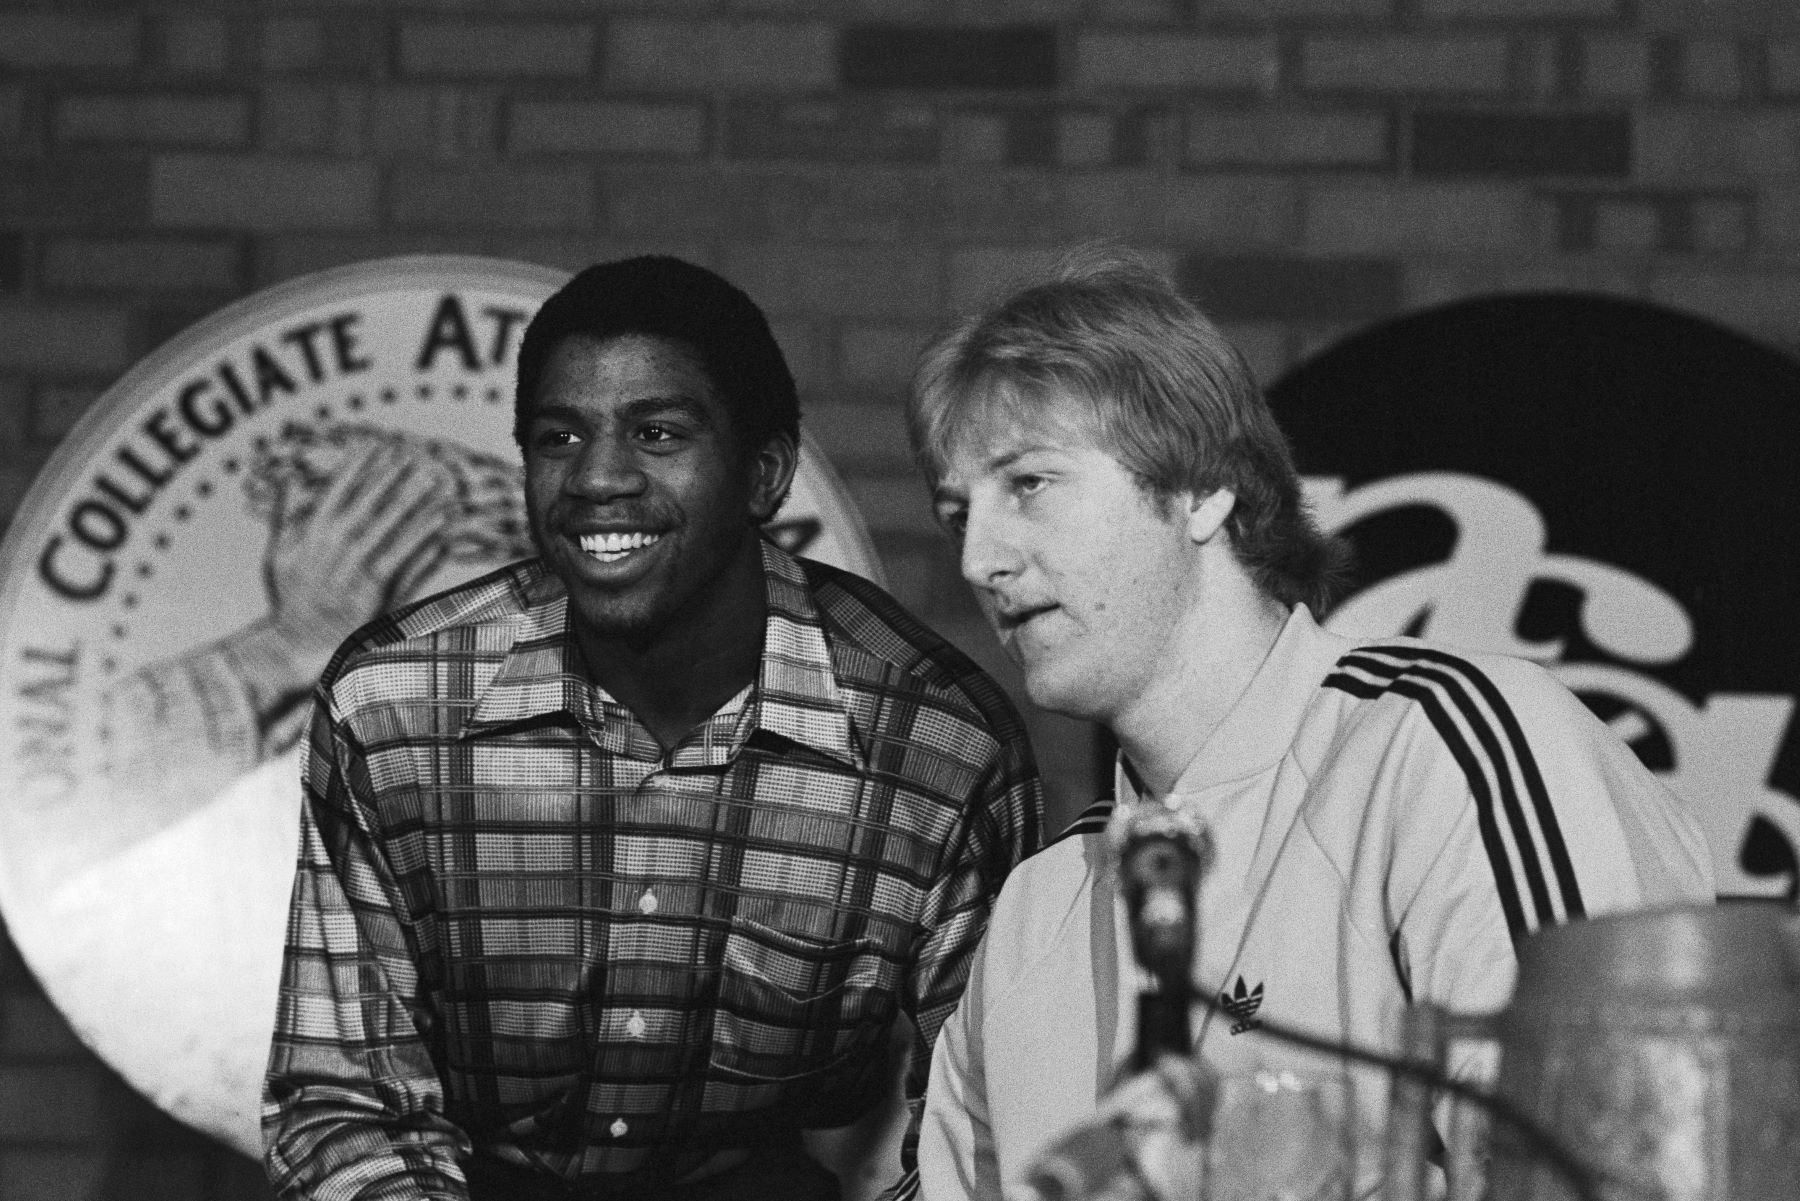 Magic Johnson and Larry Bird at a press conference in Salt Lake City, Utah, before the NCAA Final Four Championship game